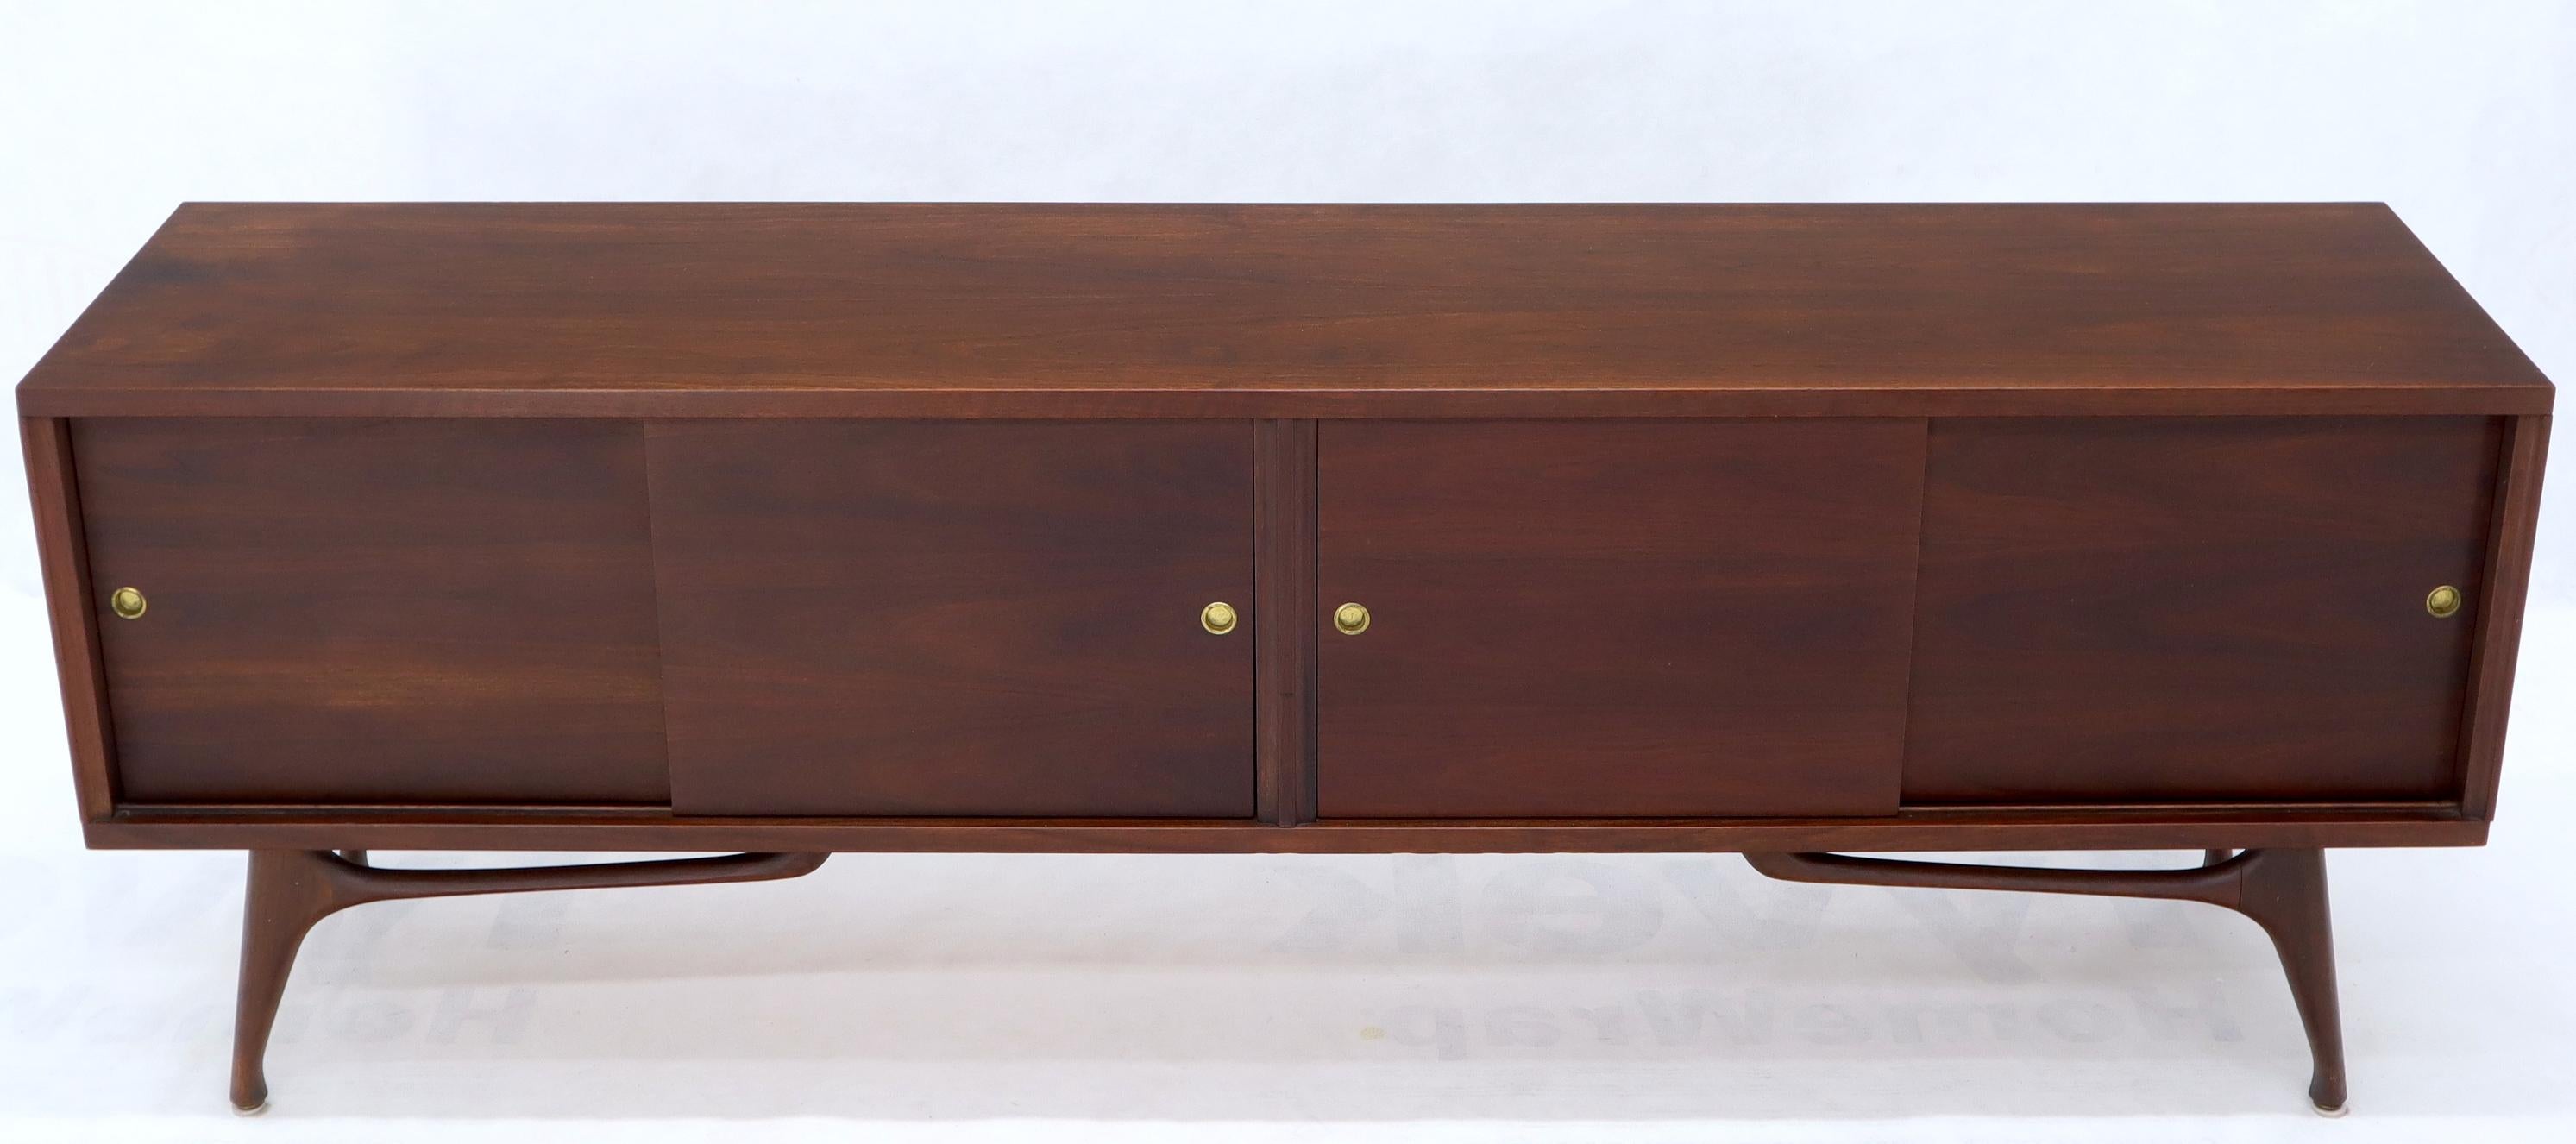 20th Century Low Profile Solid Walnut Sculptural Legs Sliding Doors Credenza Cabinet Console